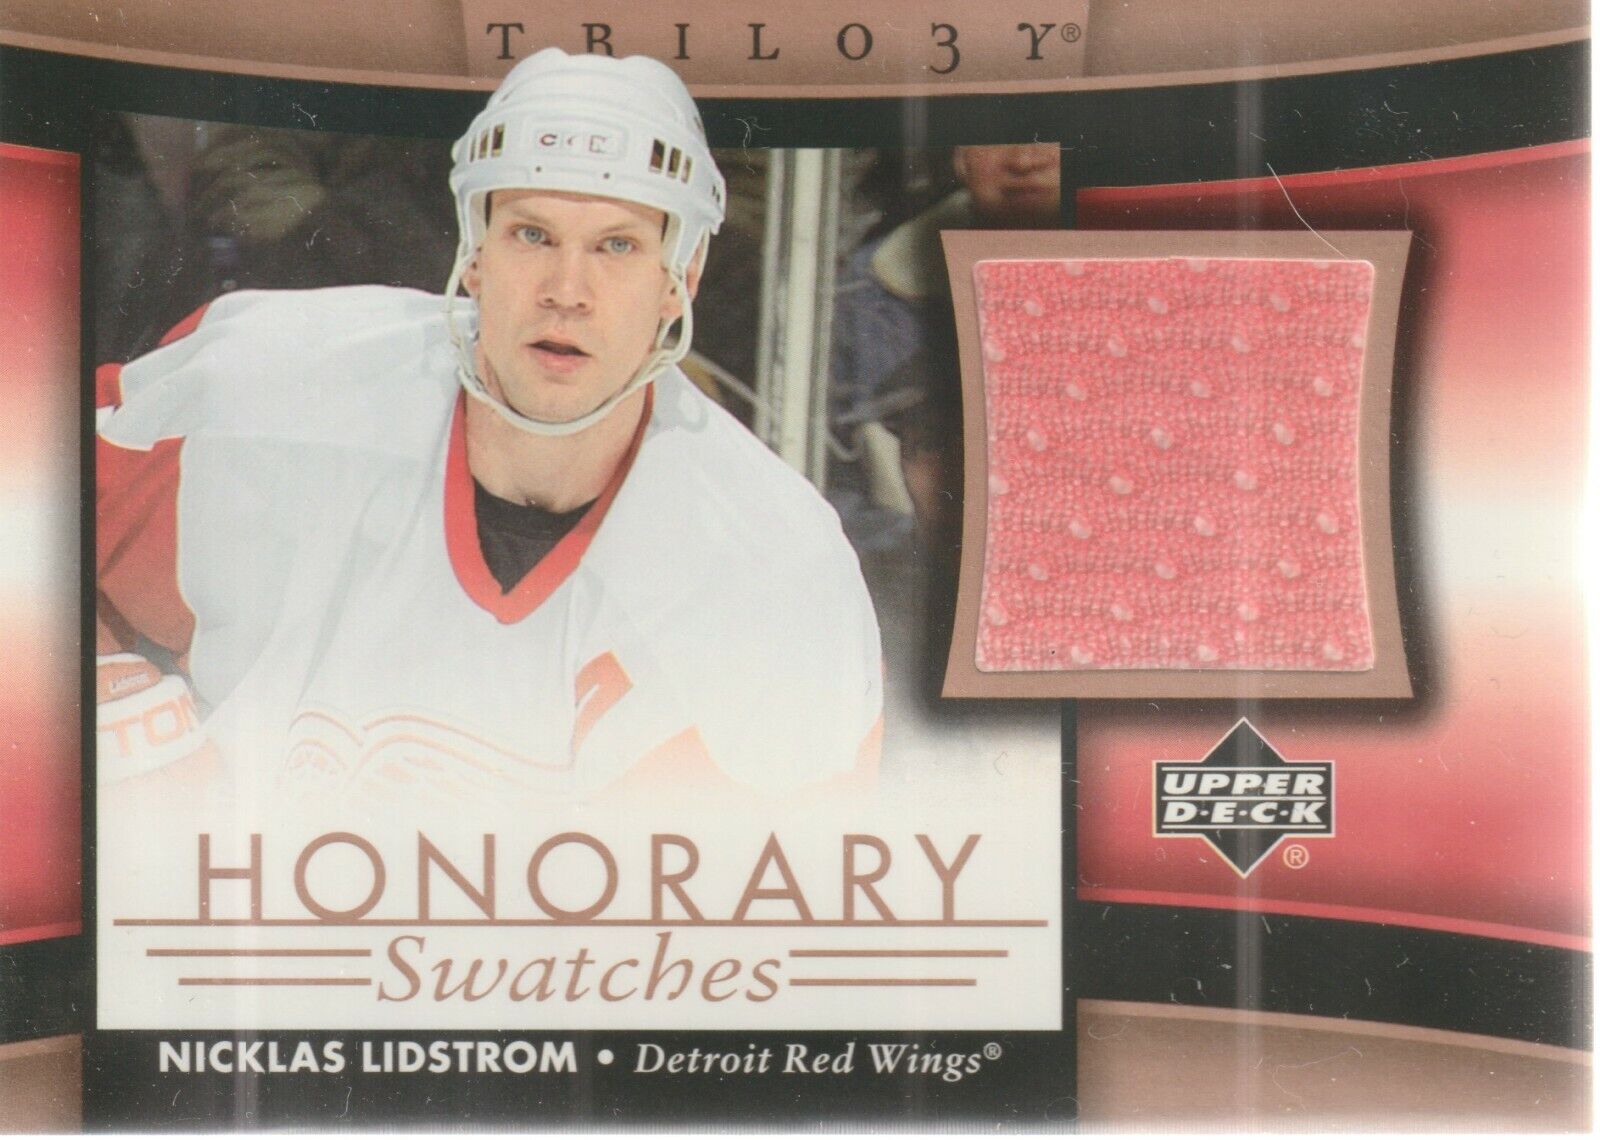 2005-06 UD Trilogy Honorary Swatches HS-NL Lidstrom